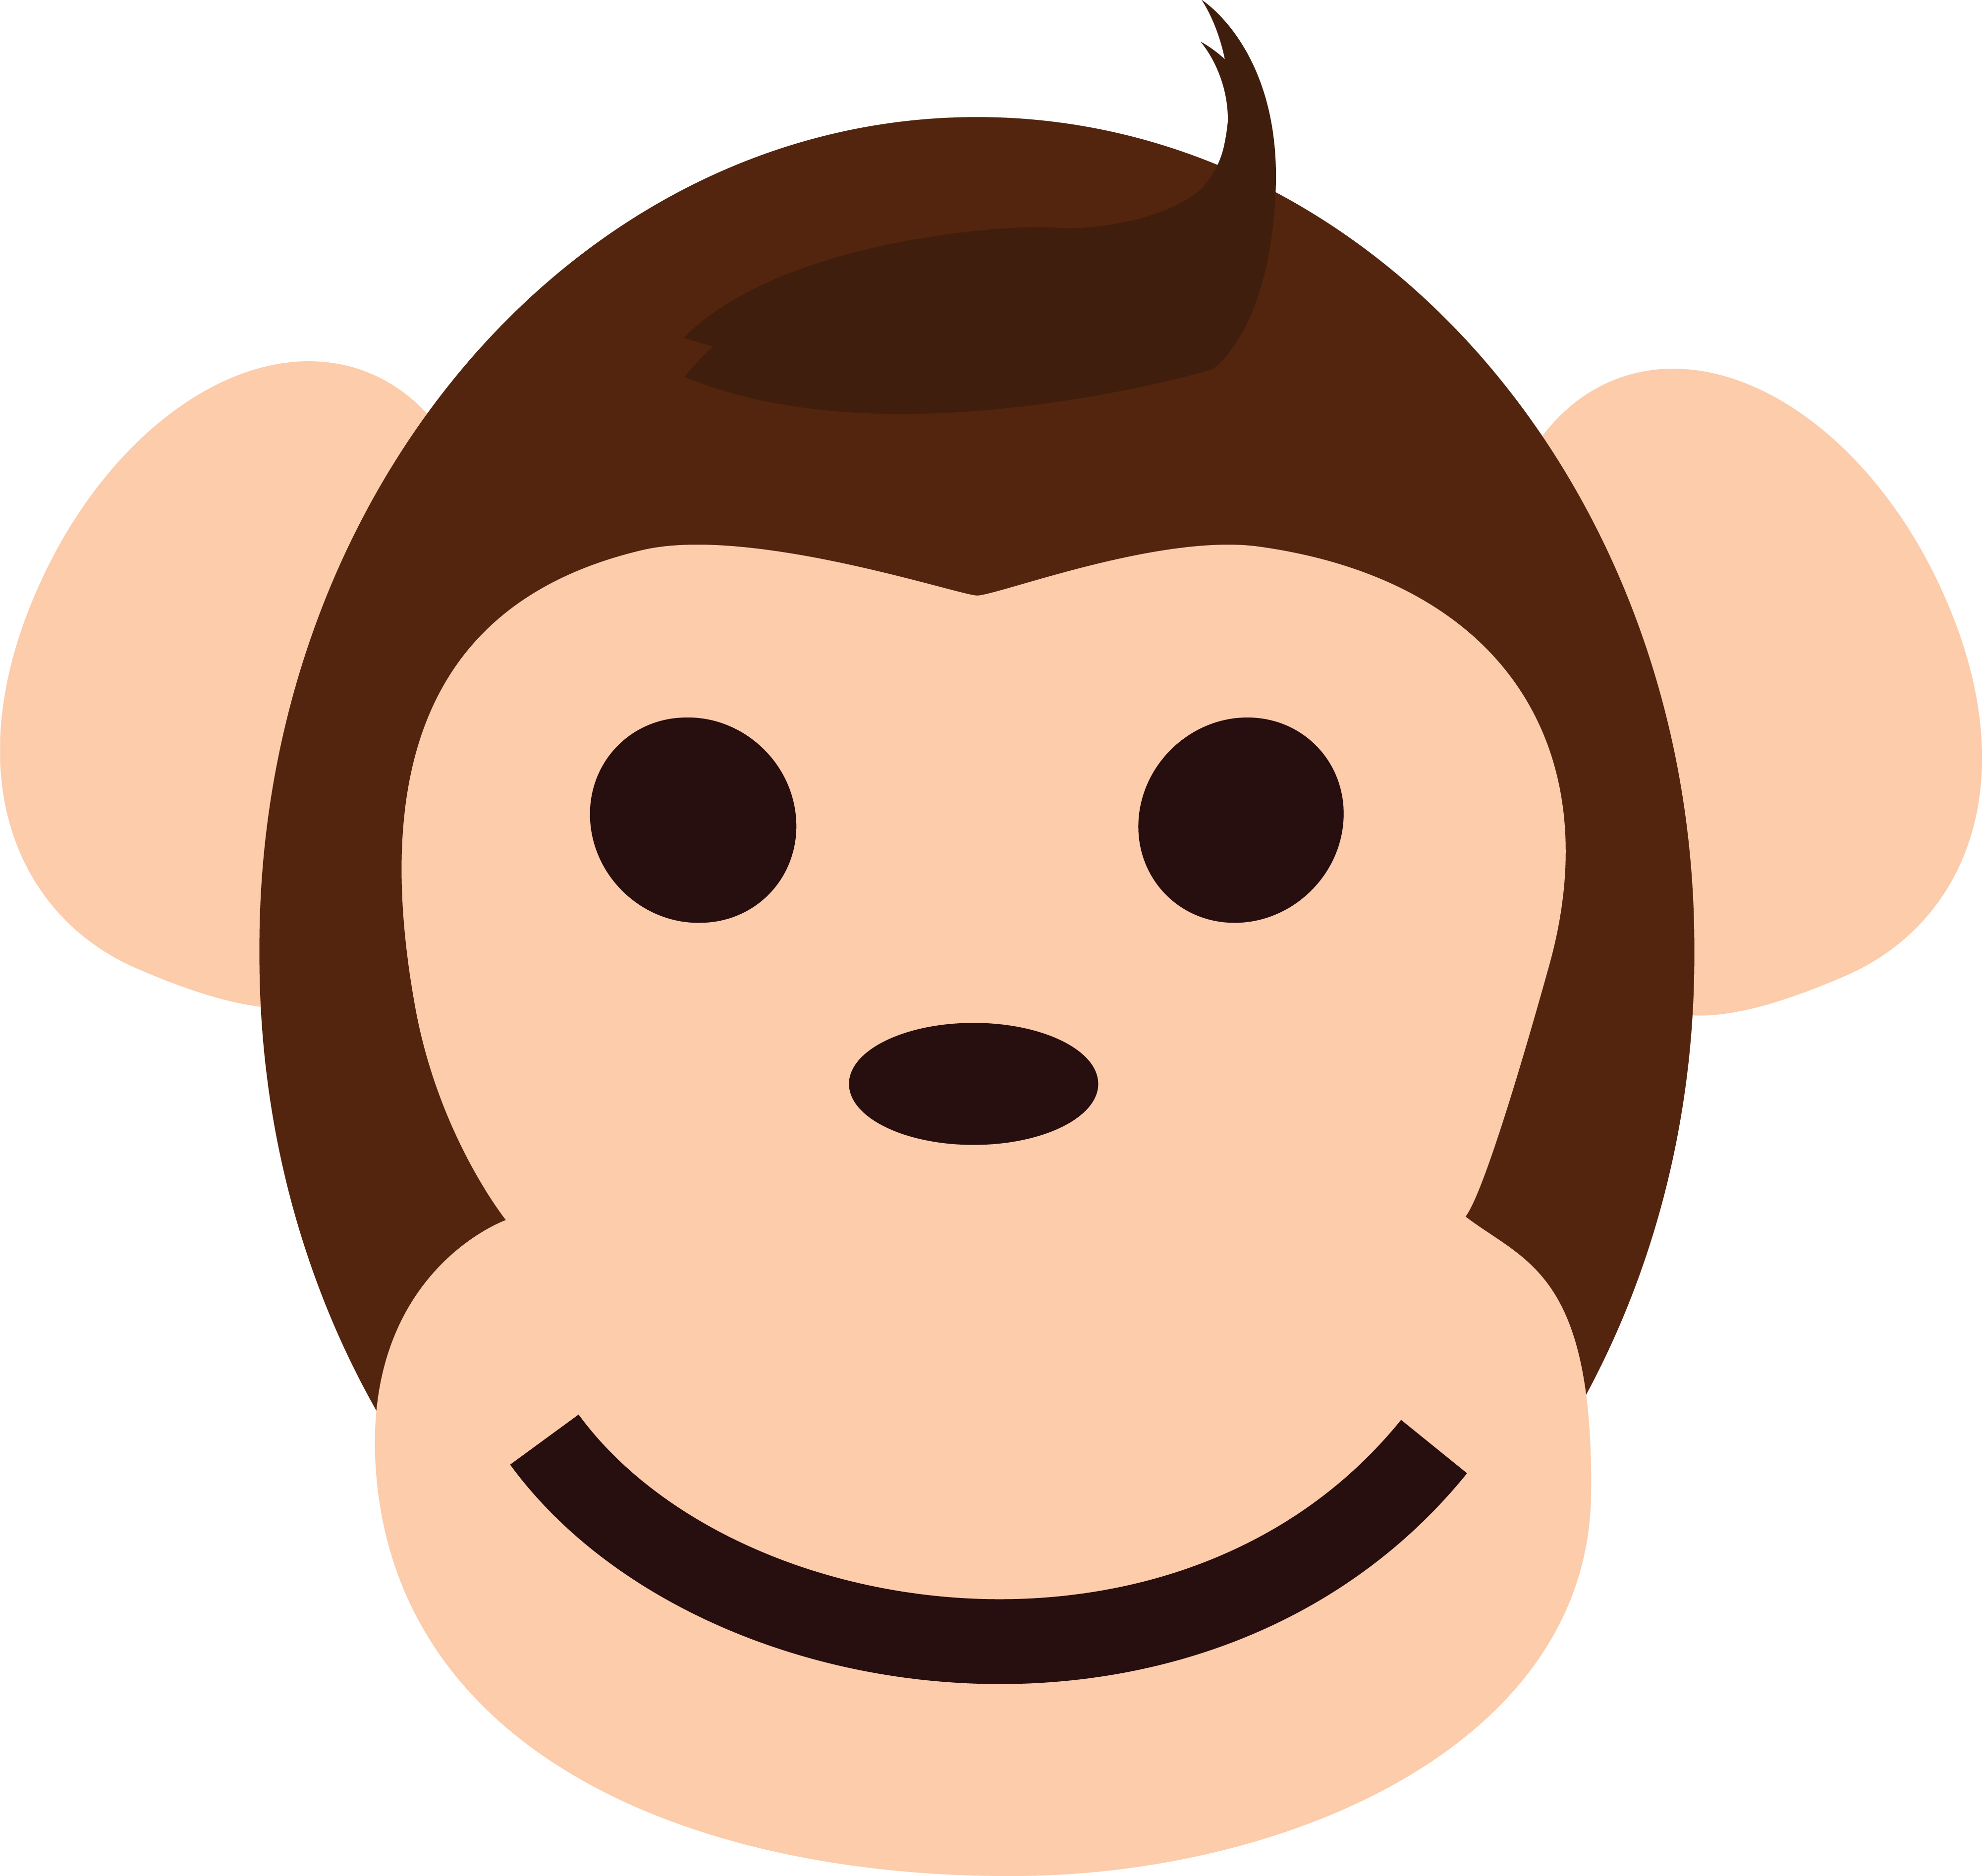 Newest Monkey Face Clipart 82